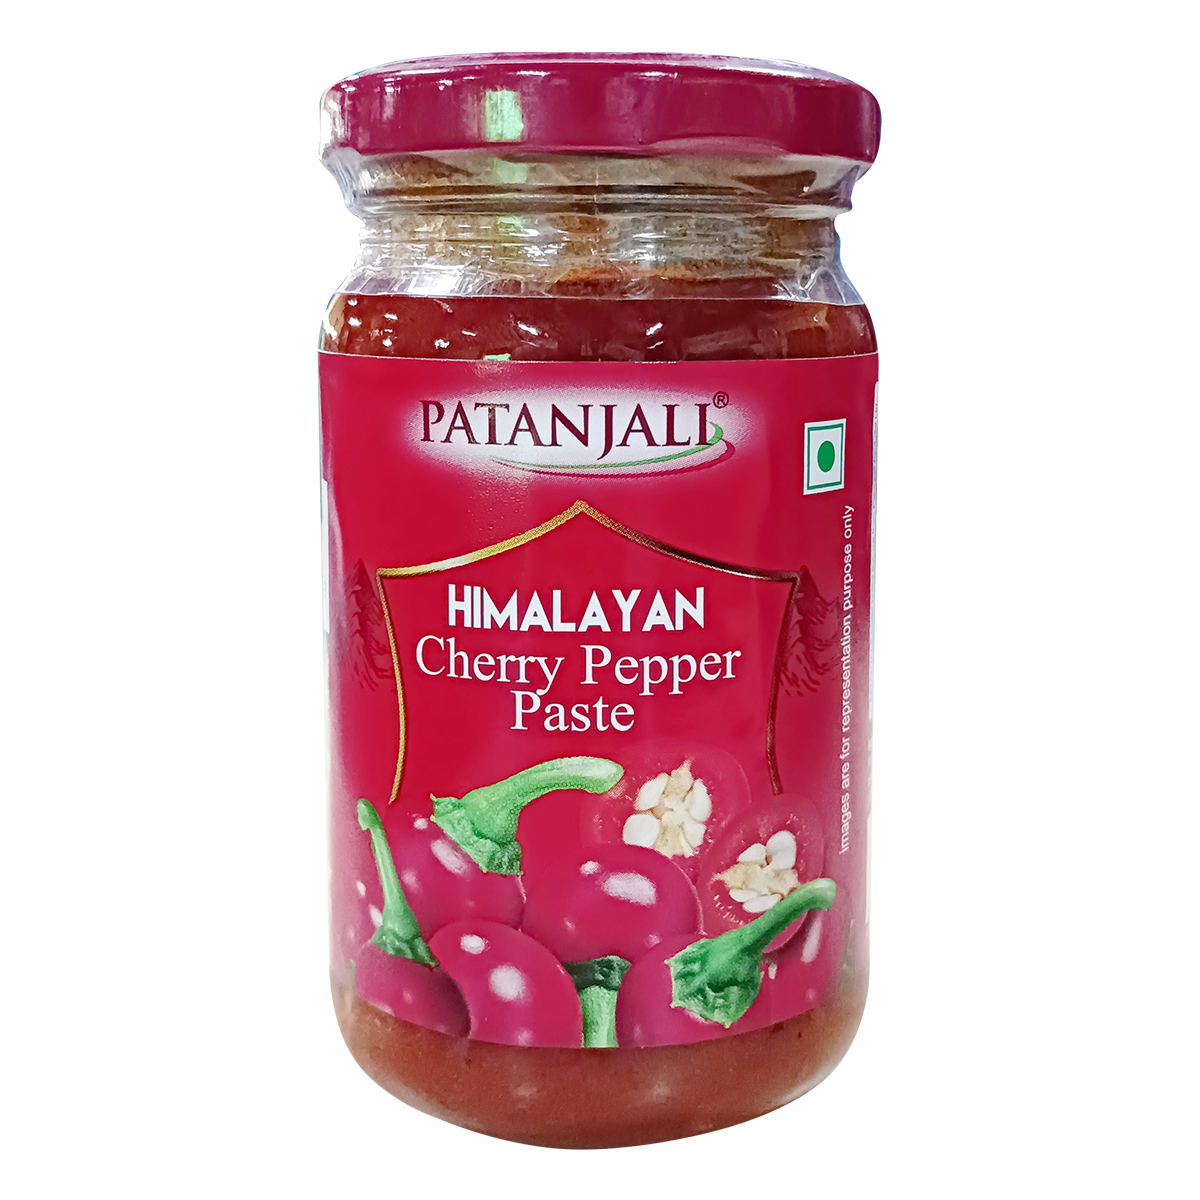 1692416475HimalayanCherryPepperPaste1.png